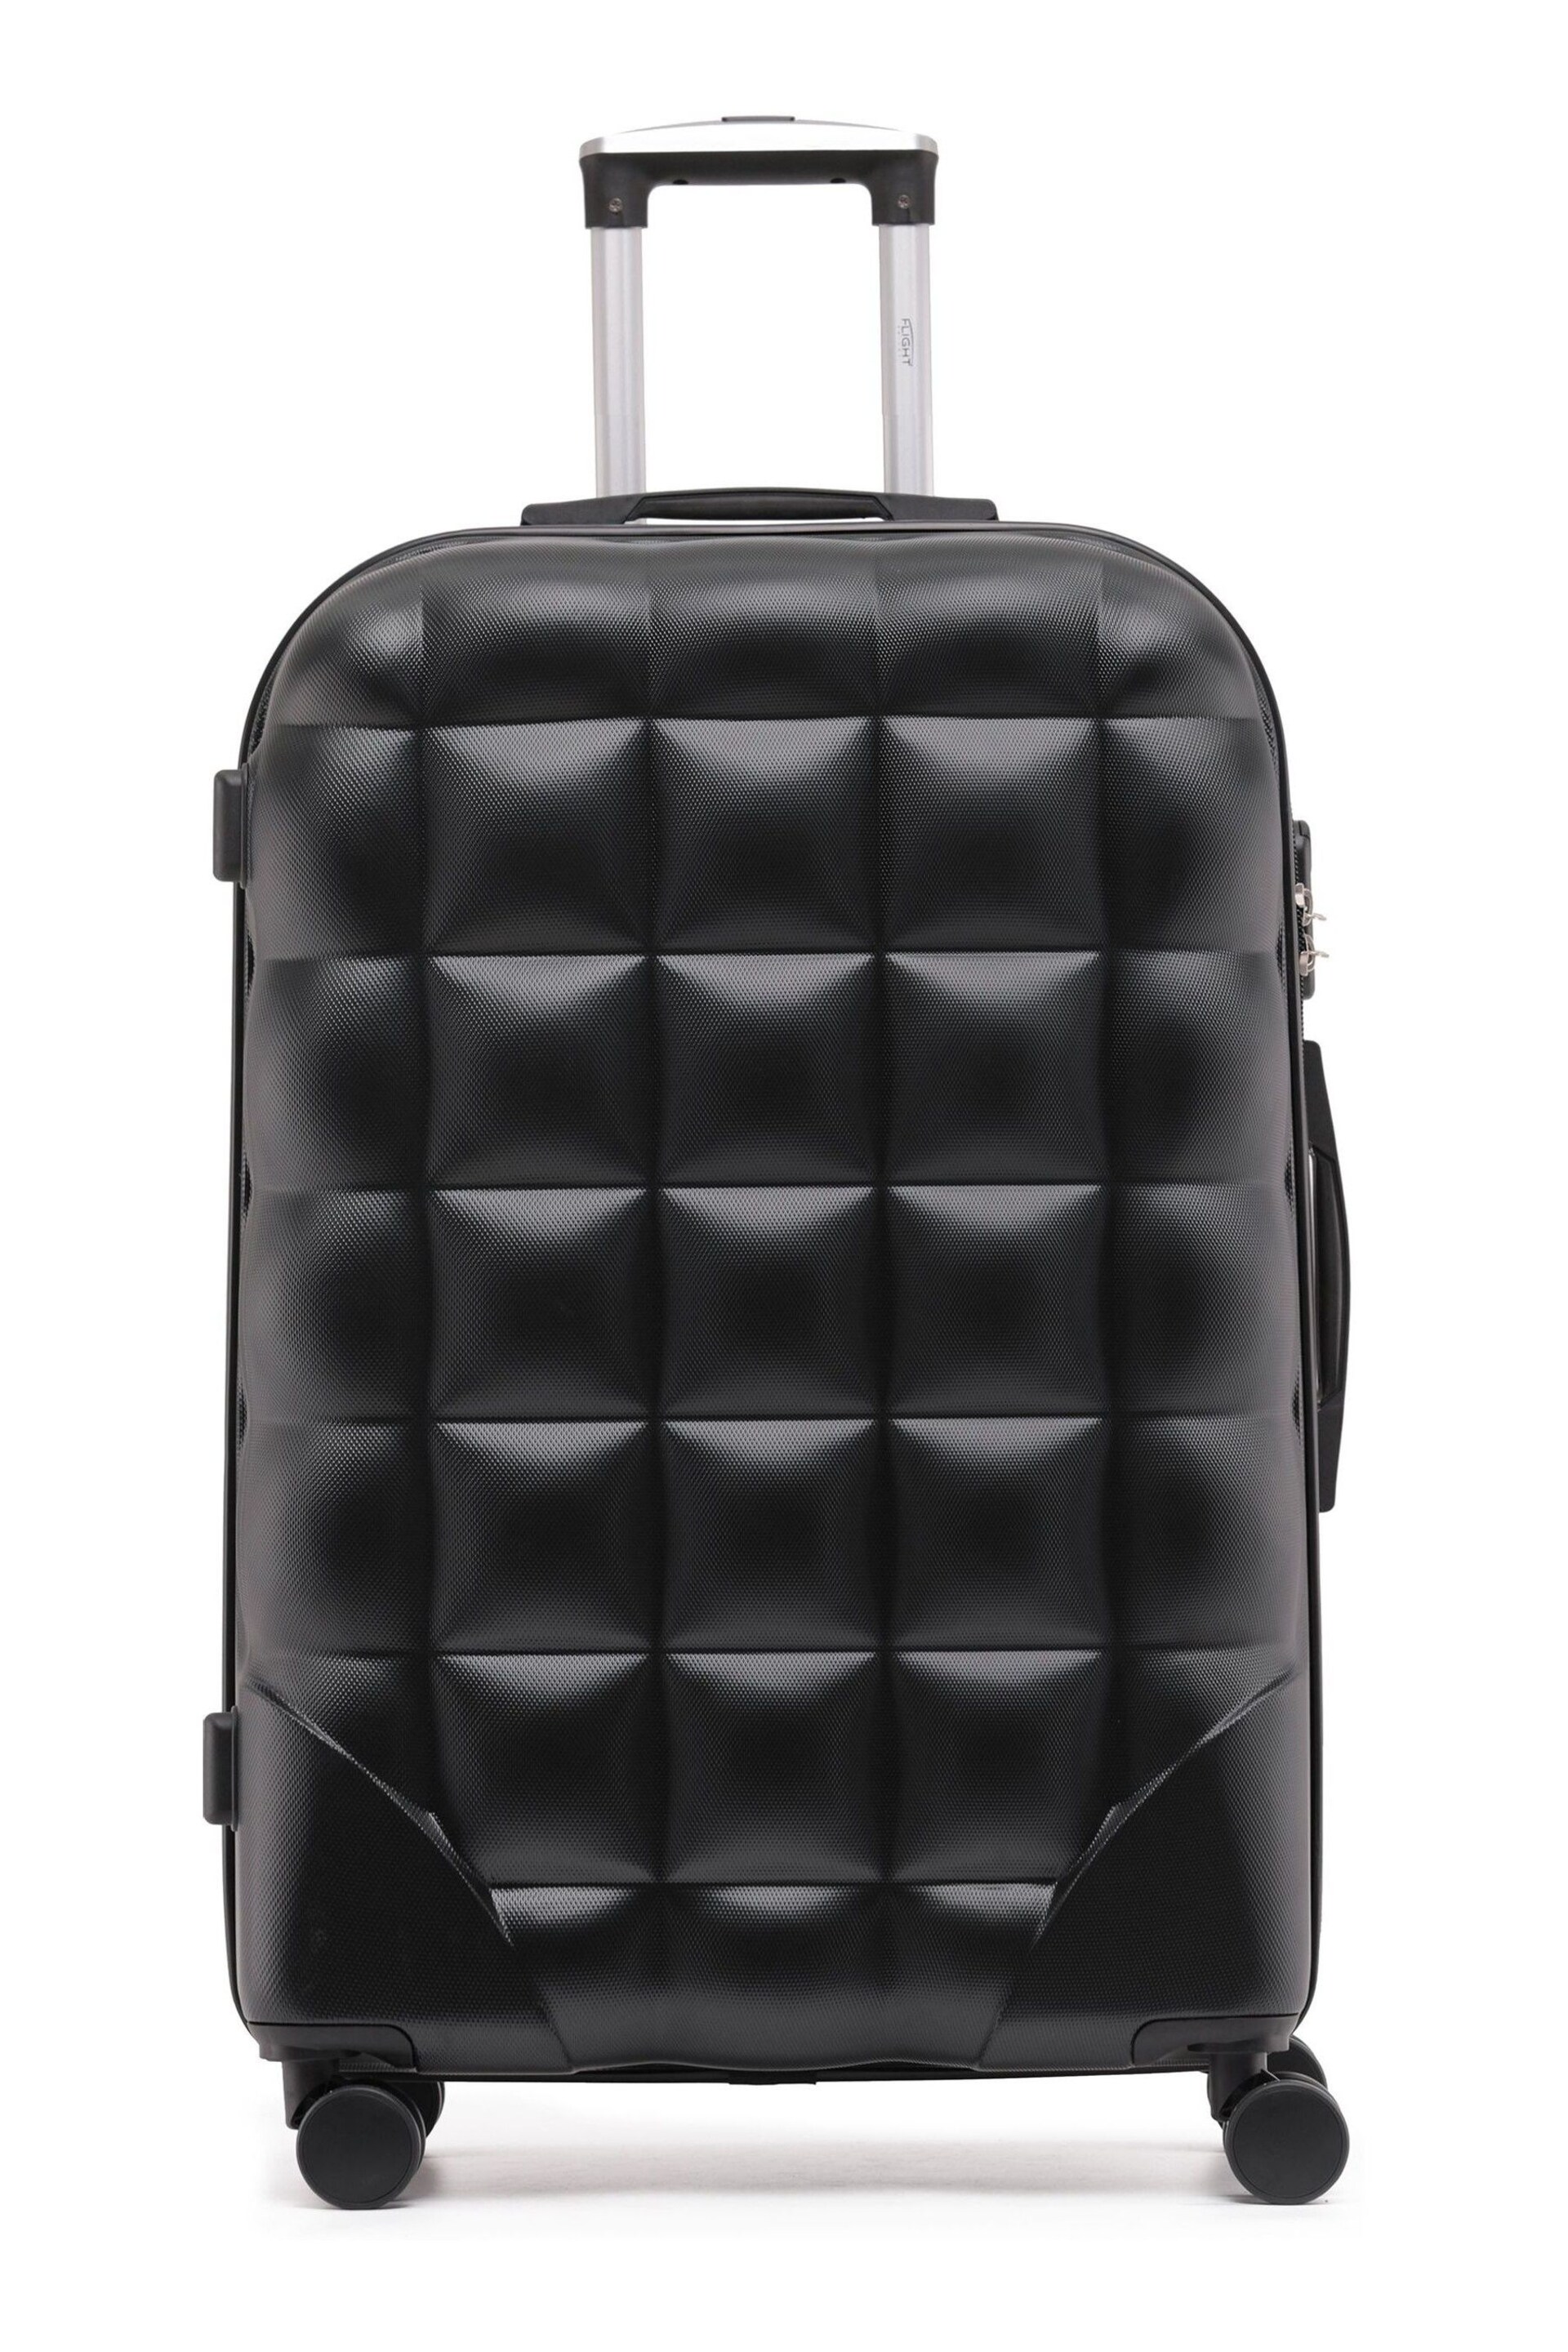 Flight Knight Large Hardcase Printed Lightweight Check In Suitcase With 4 Wheels - Image 1 of 1